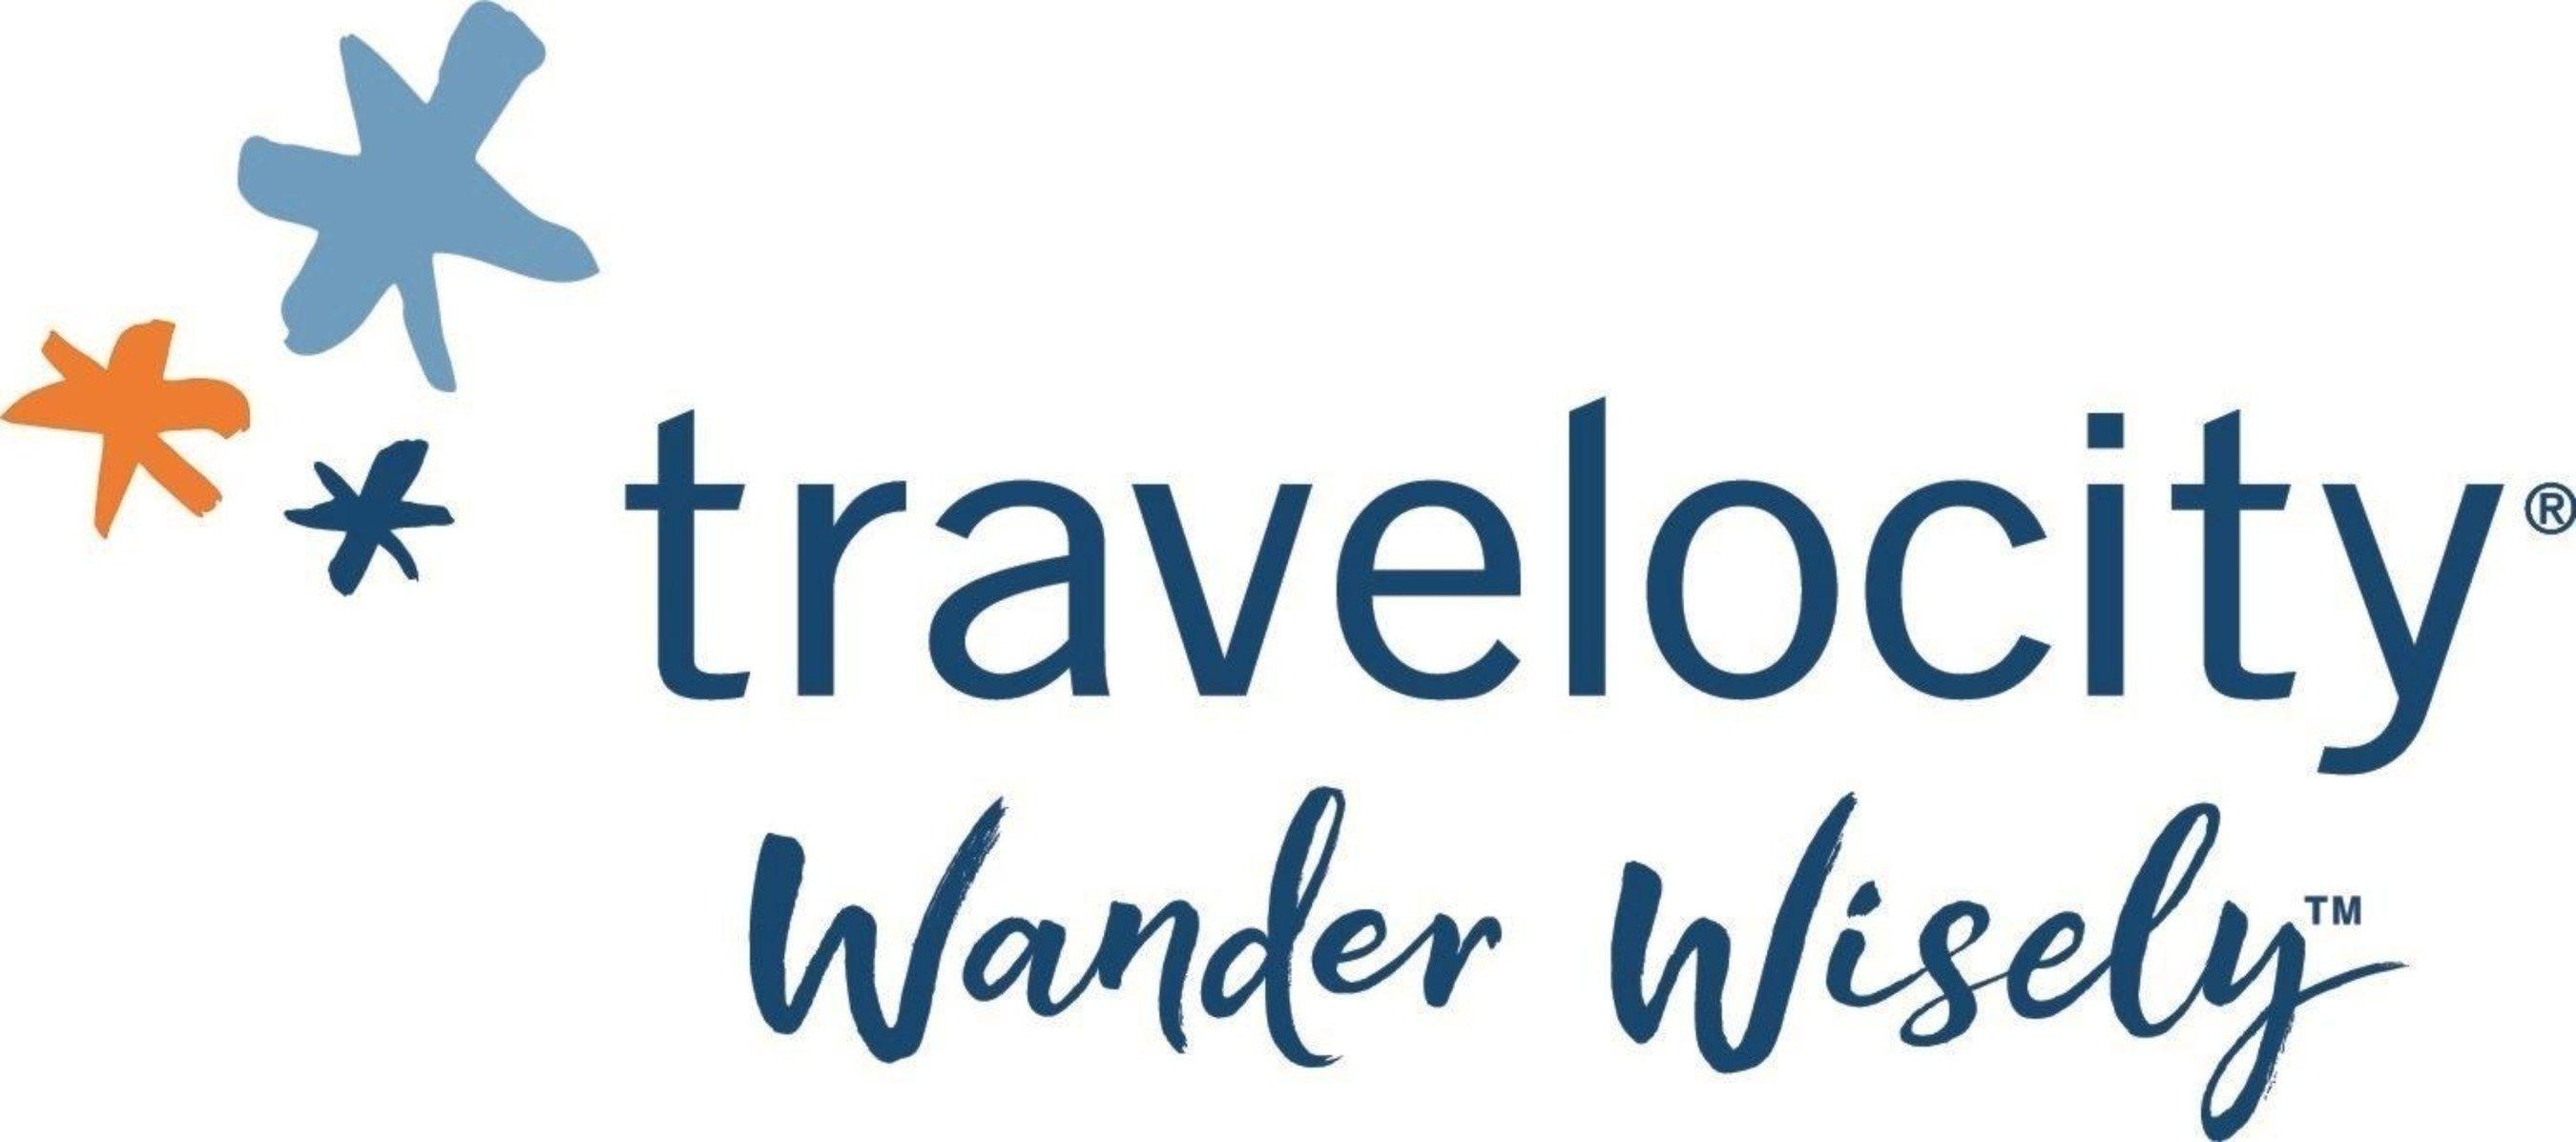 Travelocity Logo - Travelocity Experts Share Great Fourth of July Destinations to